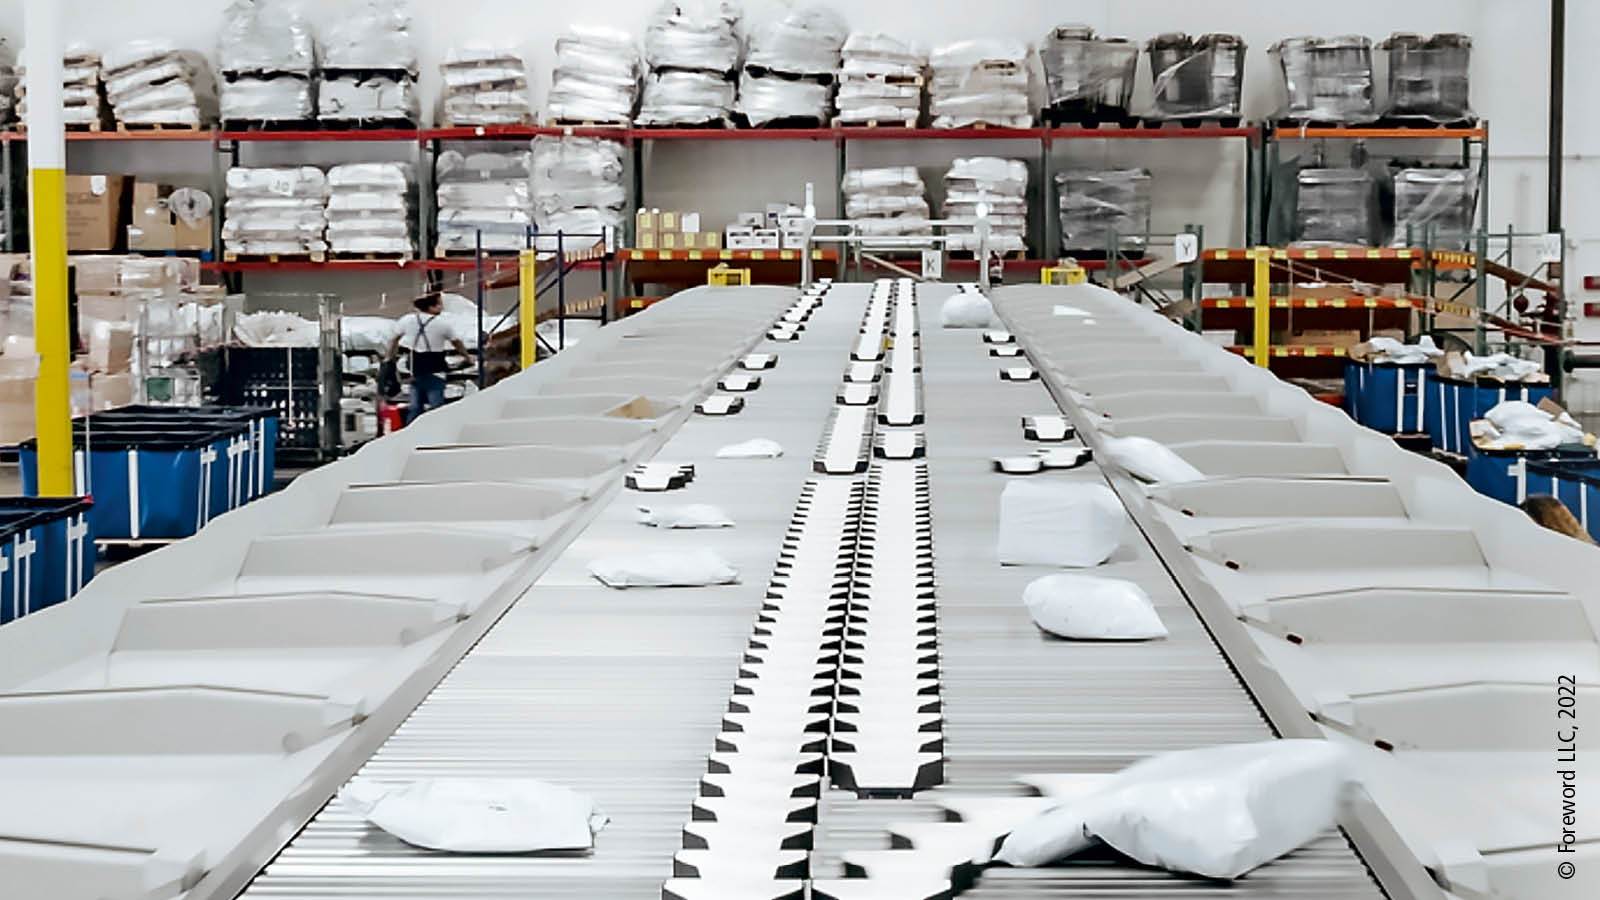 NPI developed the Xstream shoe sorter system while operating an e-commerce facility because existing solutions had difficulty handling polypacks for pharmaceuticals that they processed. 